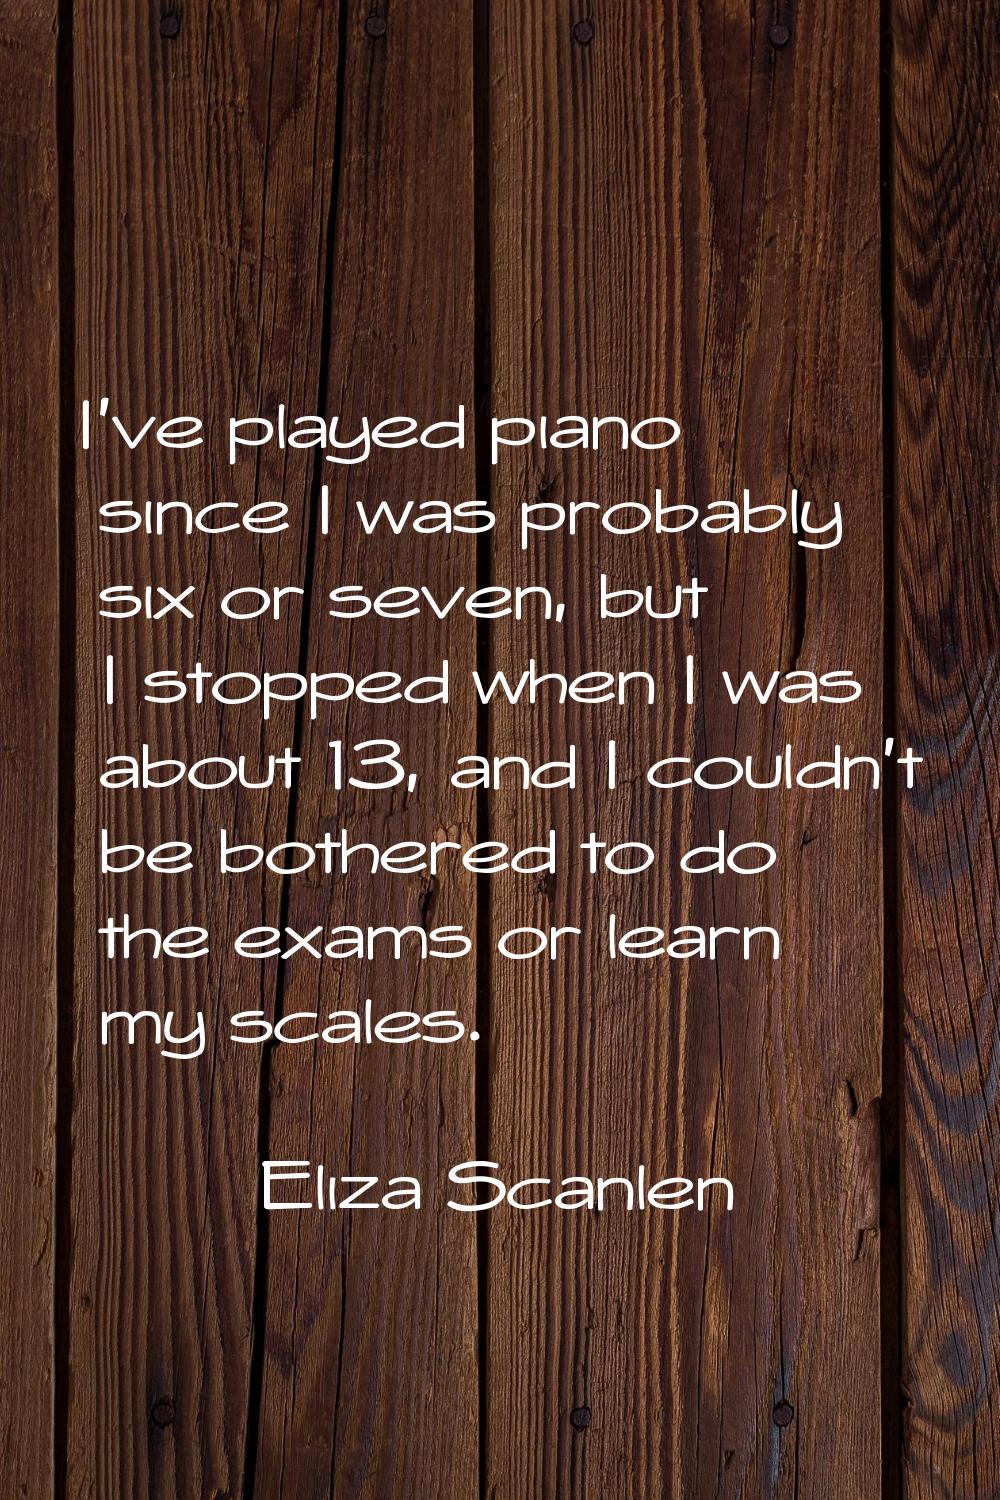 I've played piano since I was probably six or seven, but I stopped when I was about 13, and I could